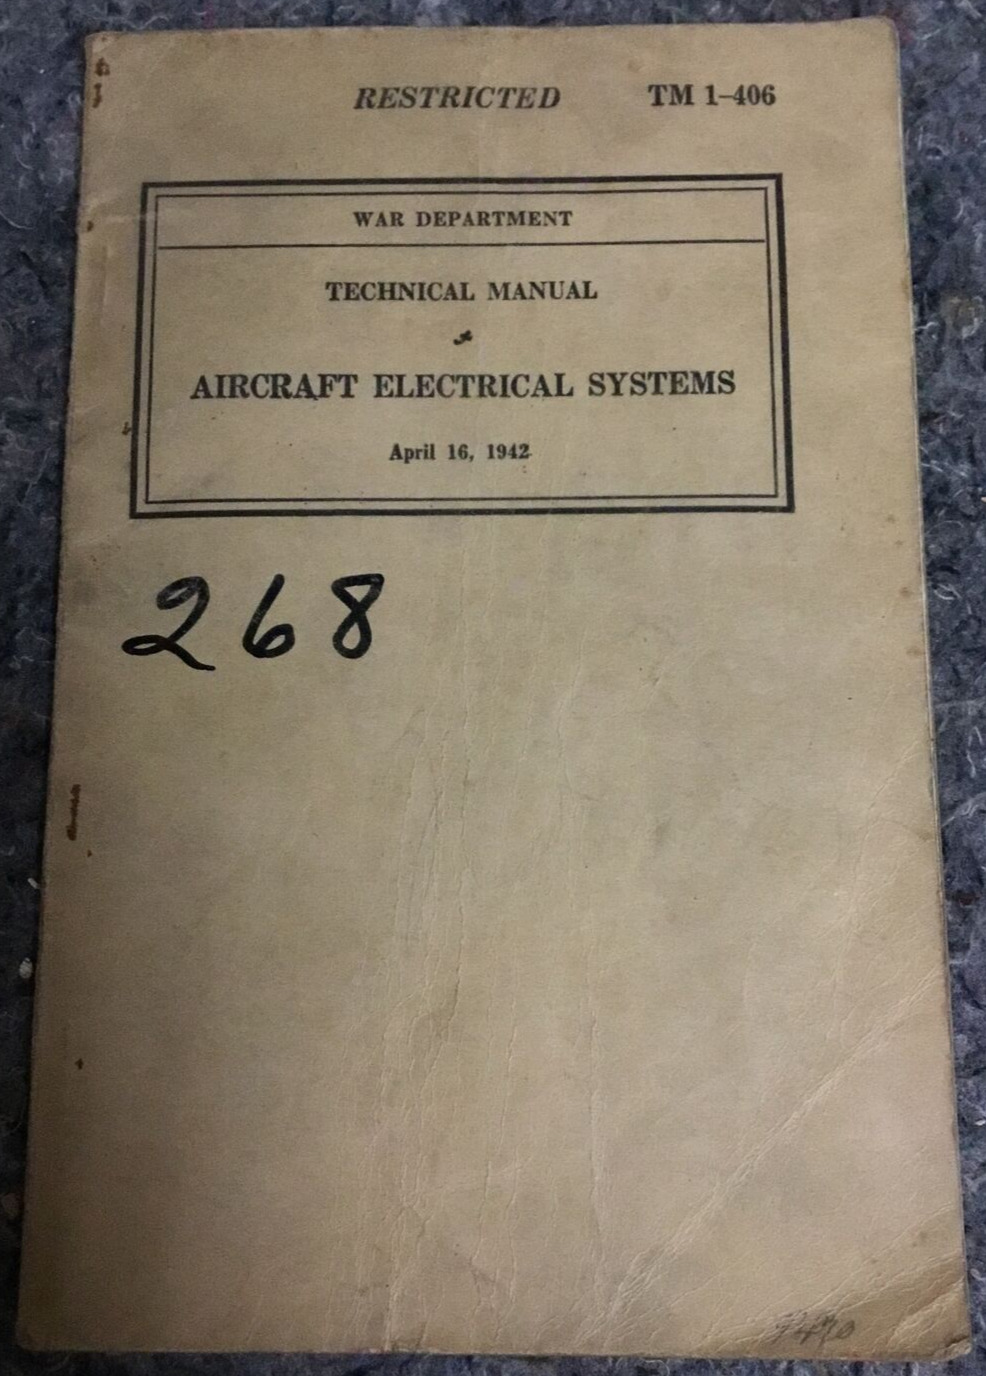 WWII Aircraft Electrical Systems Technical Manual( TMI-406)